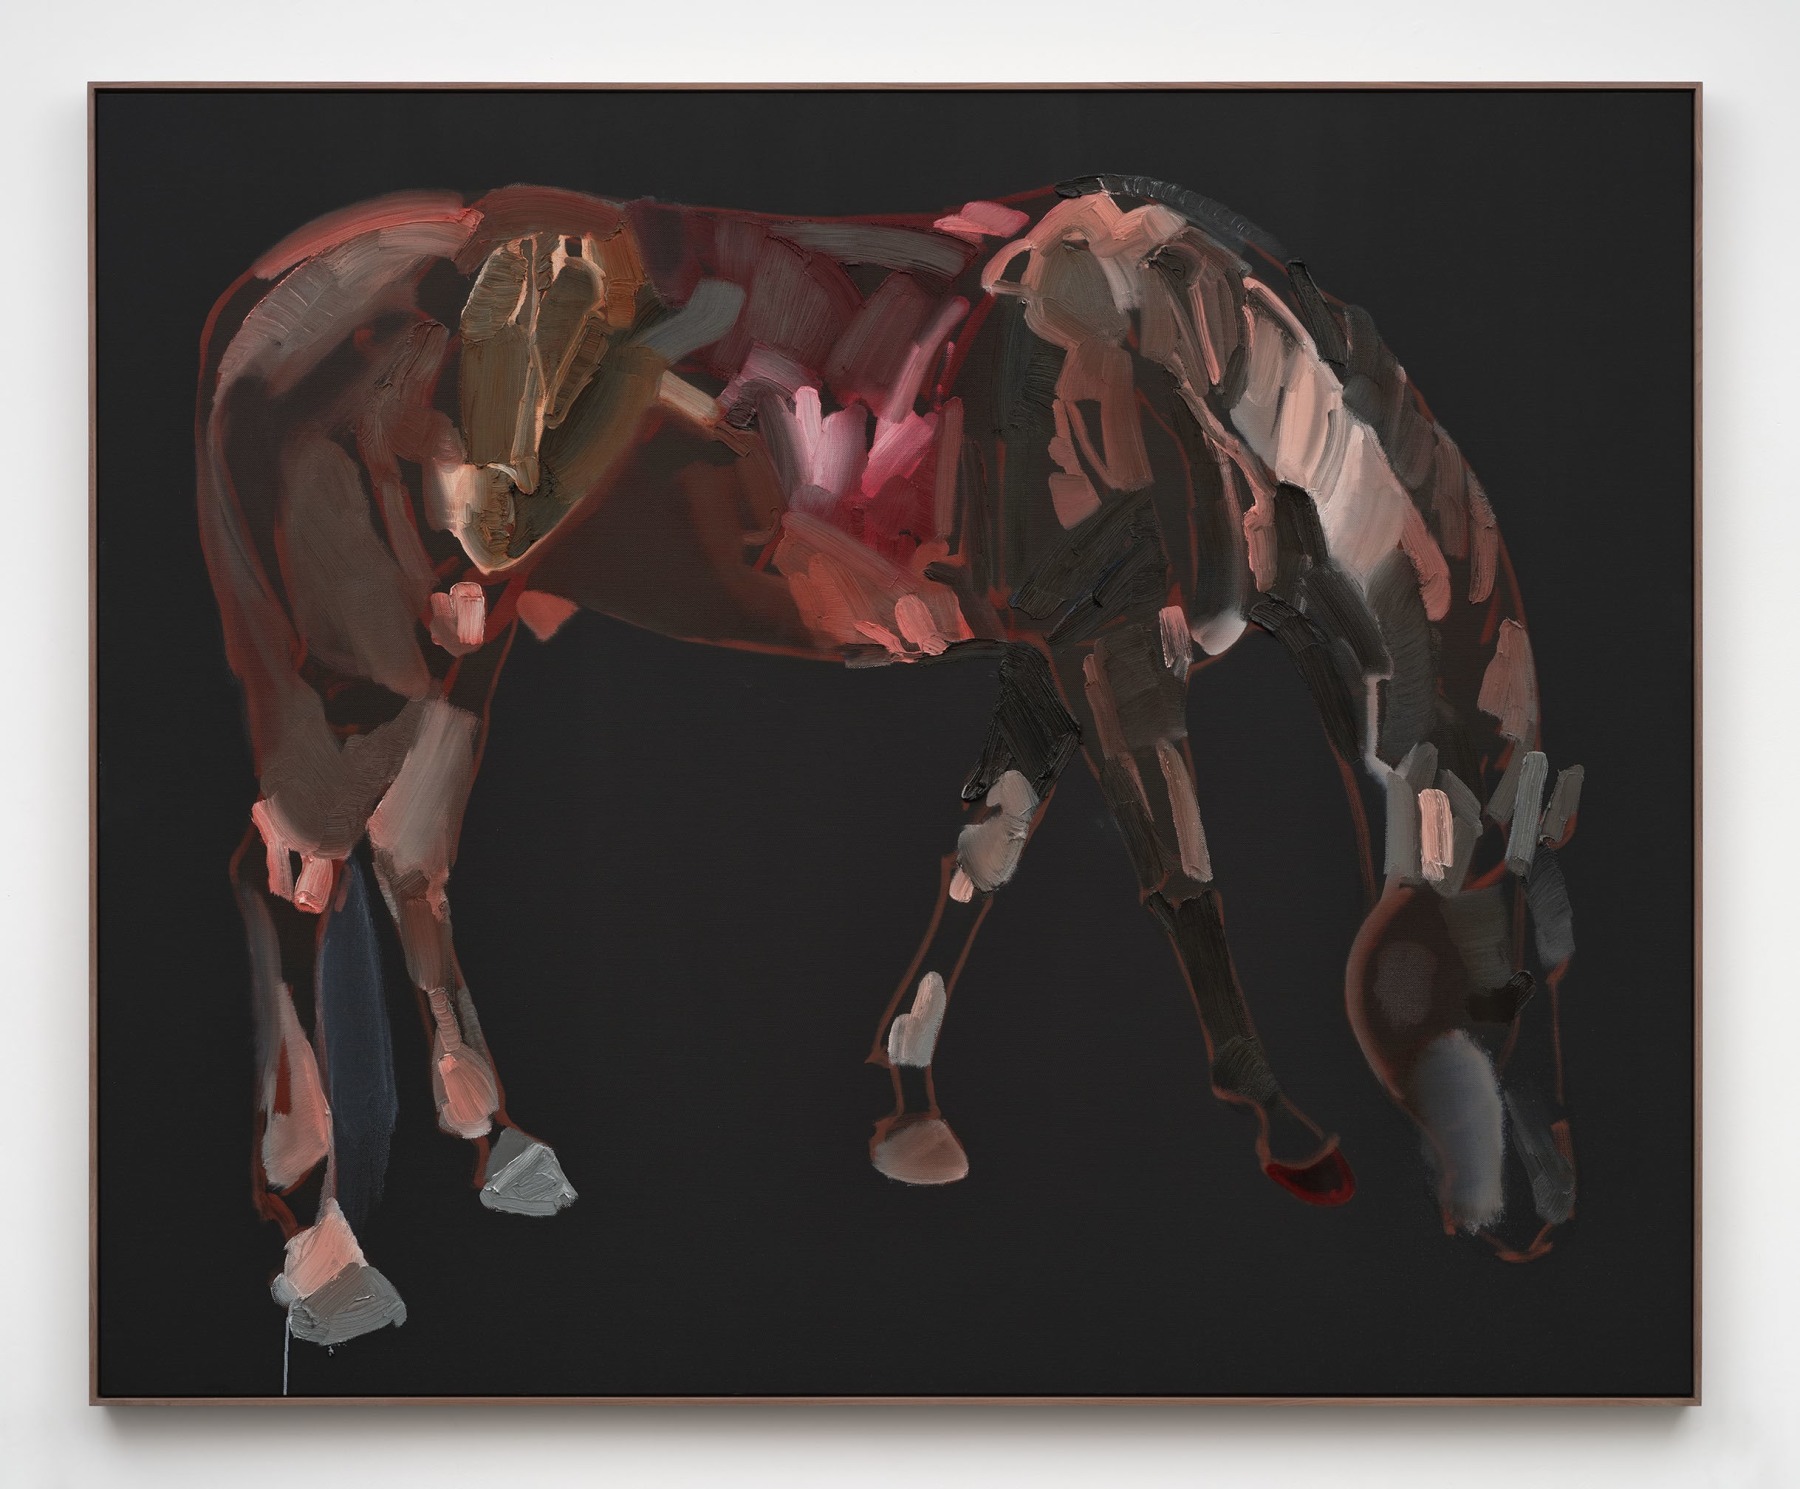 A painting of a horse rendered in deep browns and burgundies against a black background